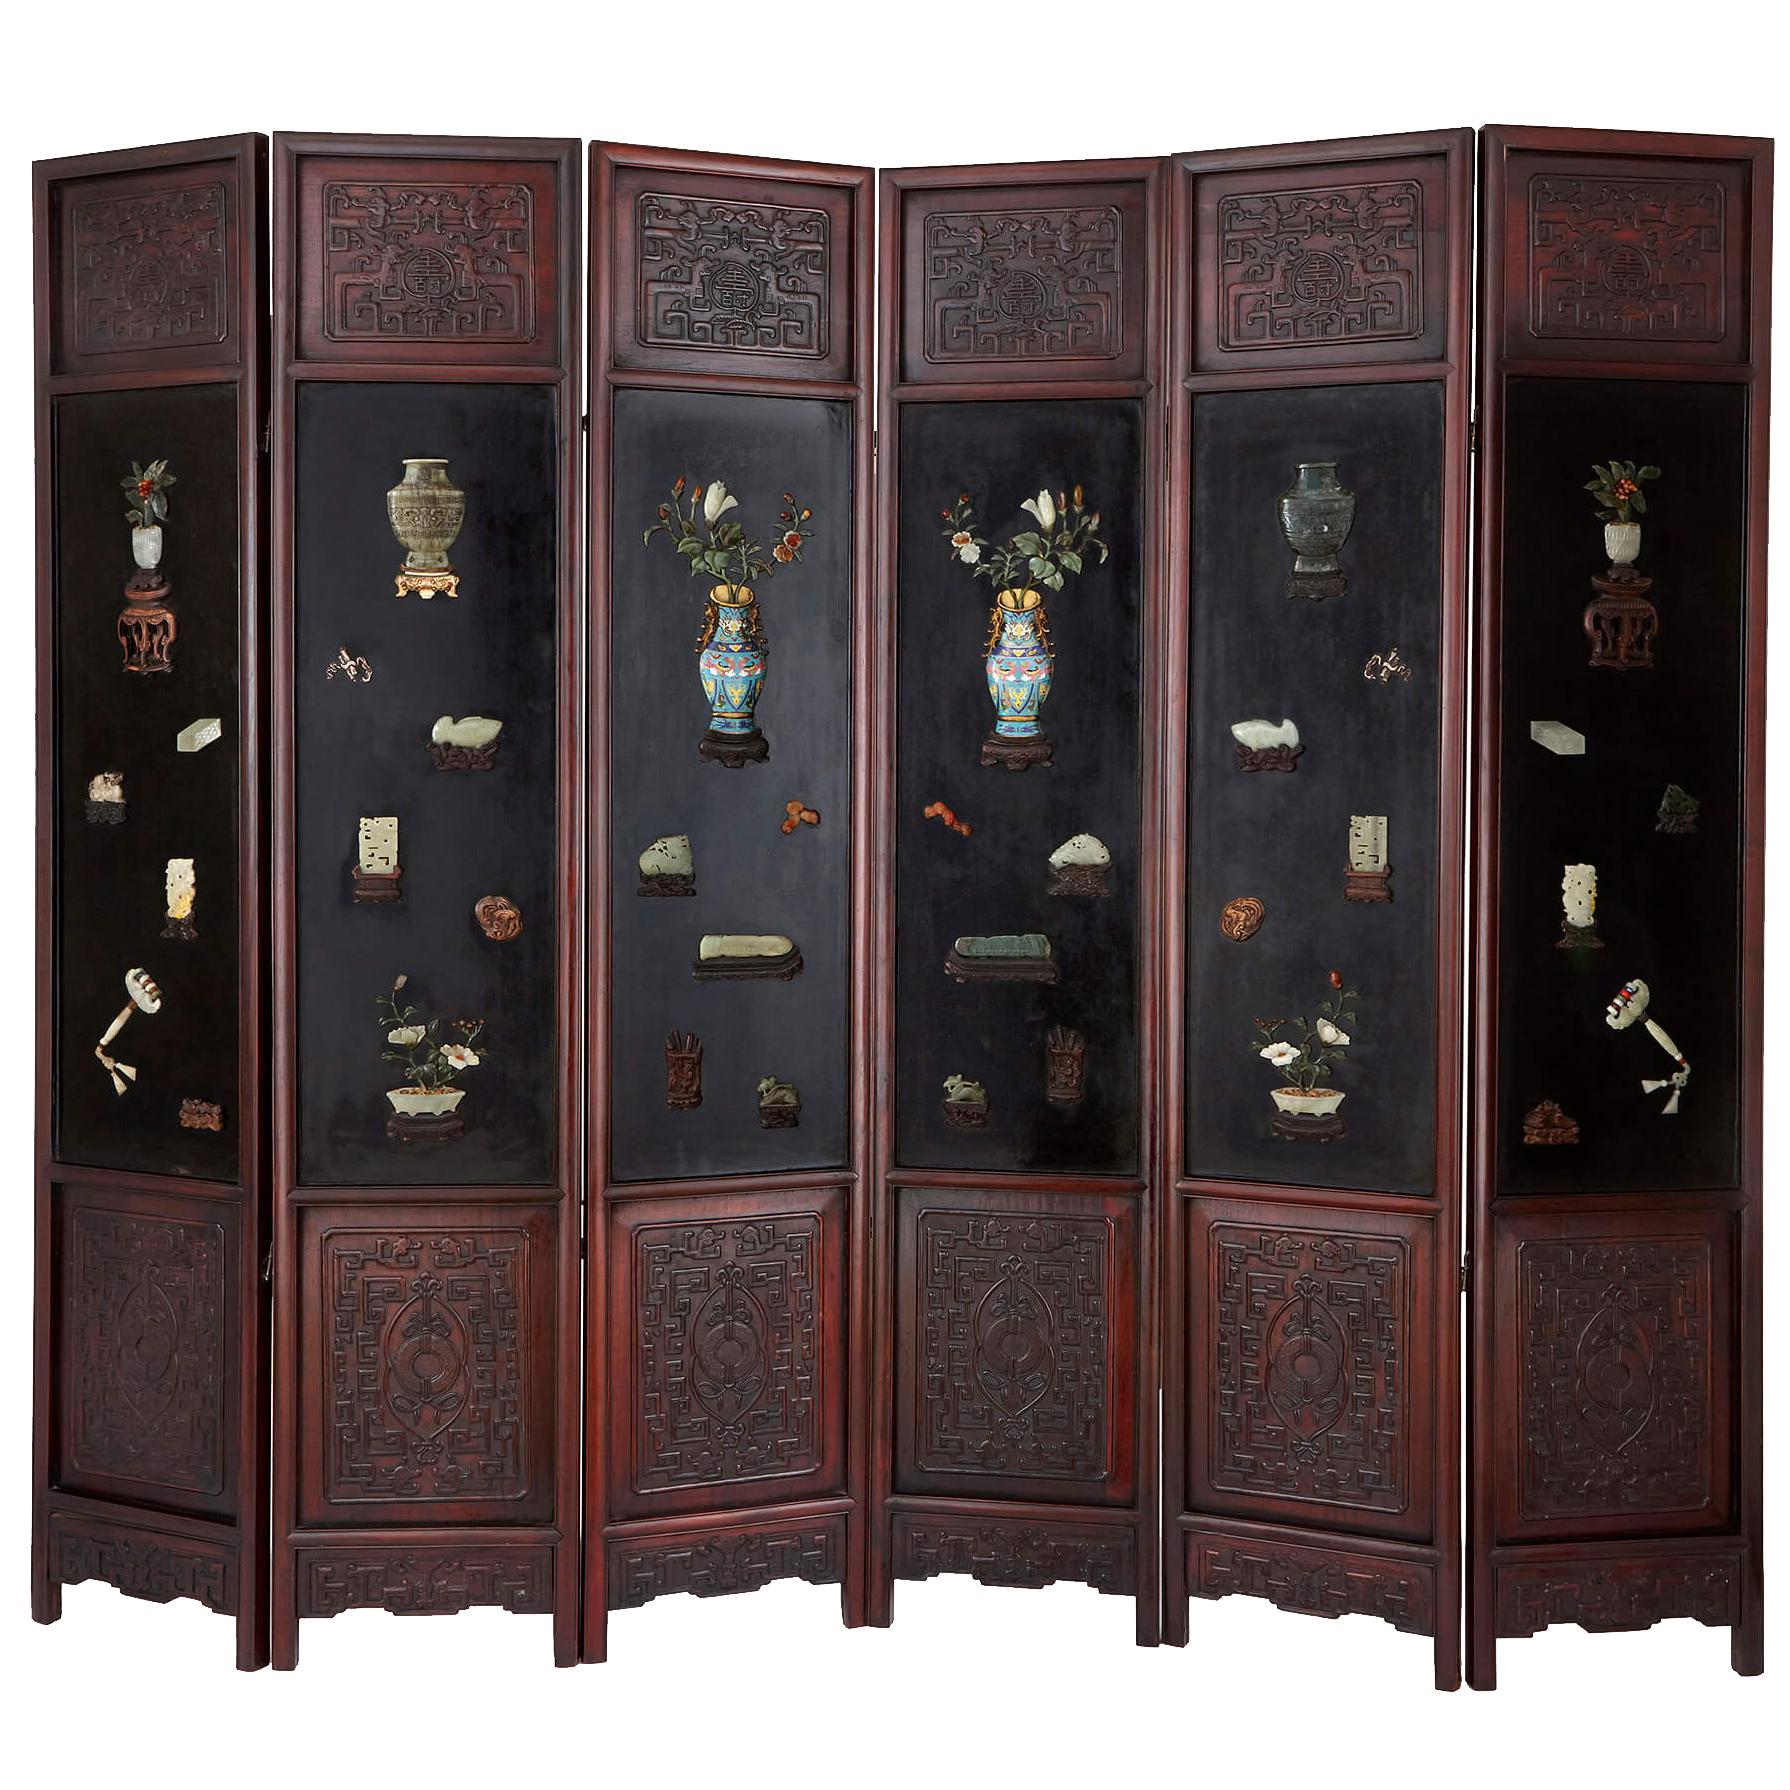 Chinese Hardstone, Cloisonne Enamel and Lacquer Screen